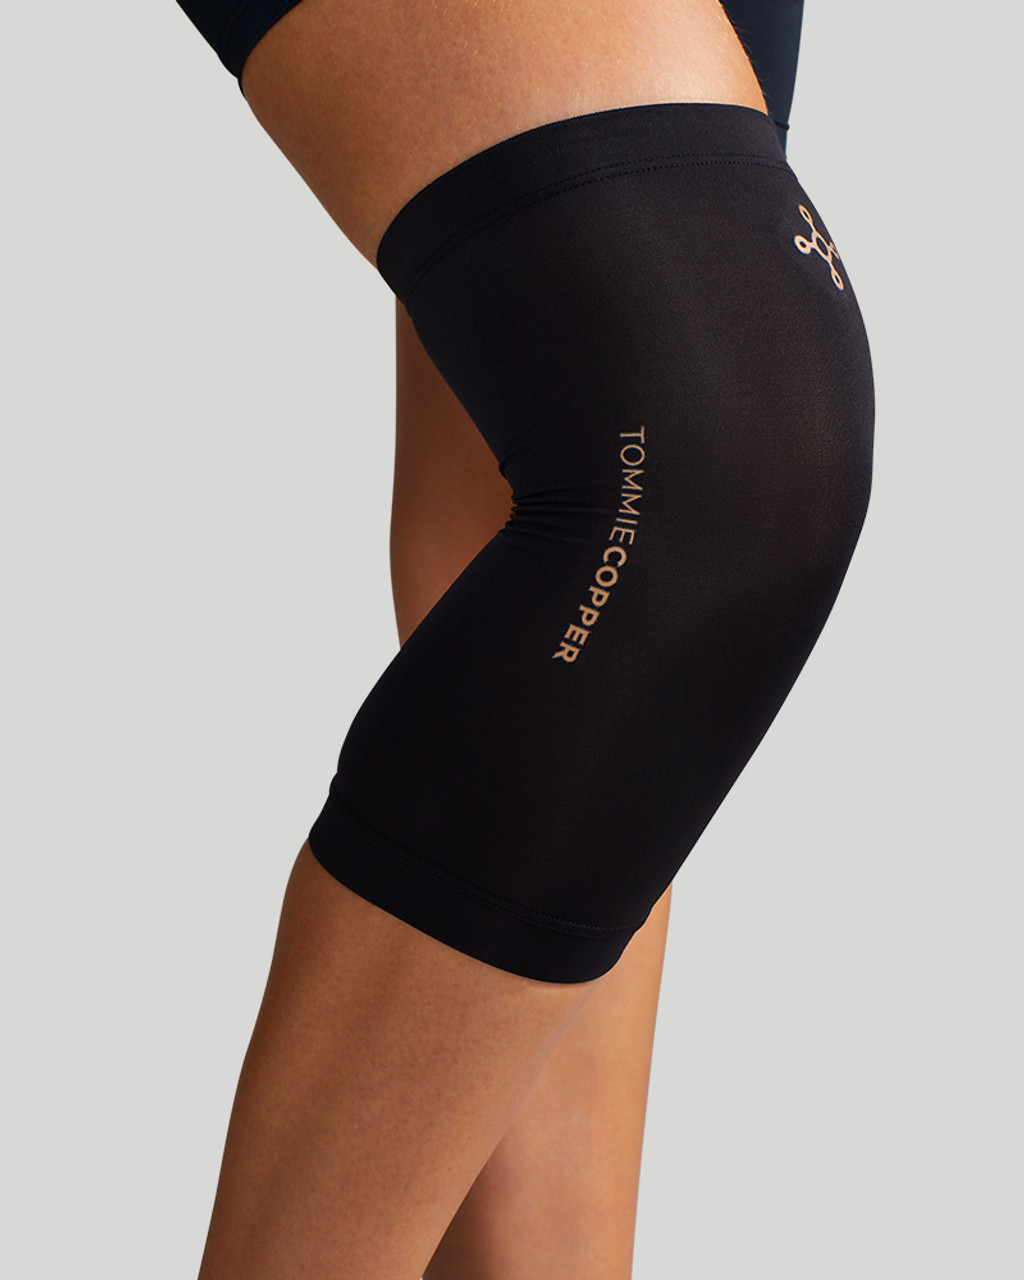 Tommie Copper Sport Compression Knee Sleeve, Black, Large/Extra